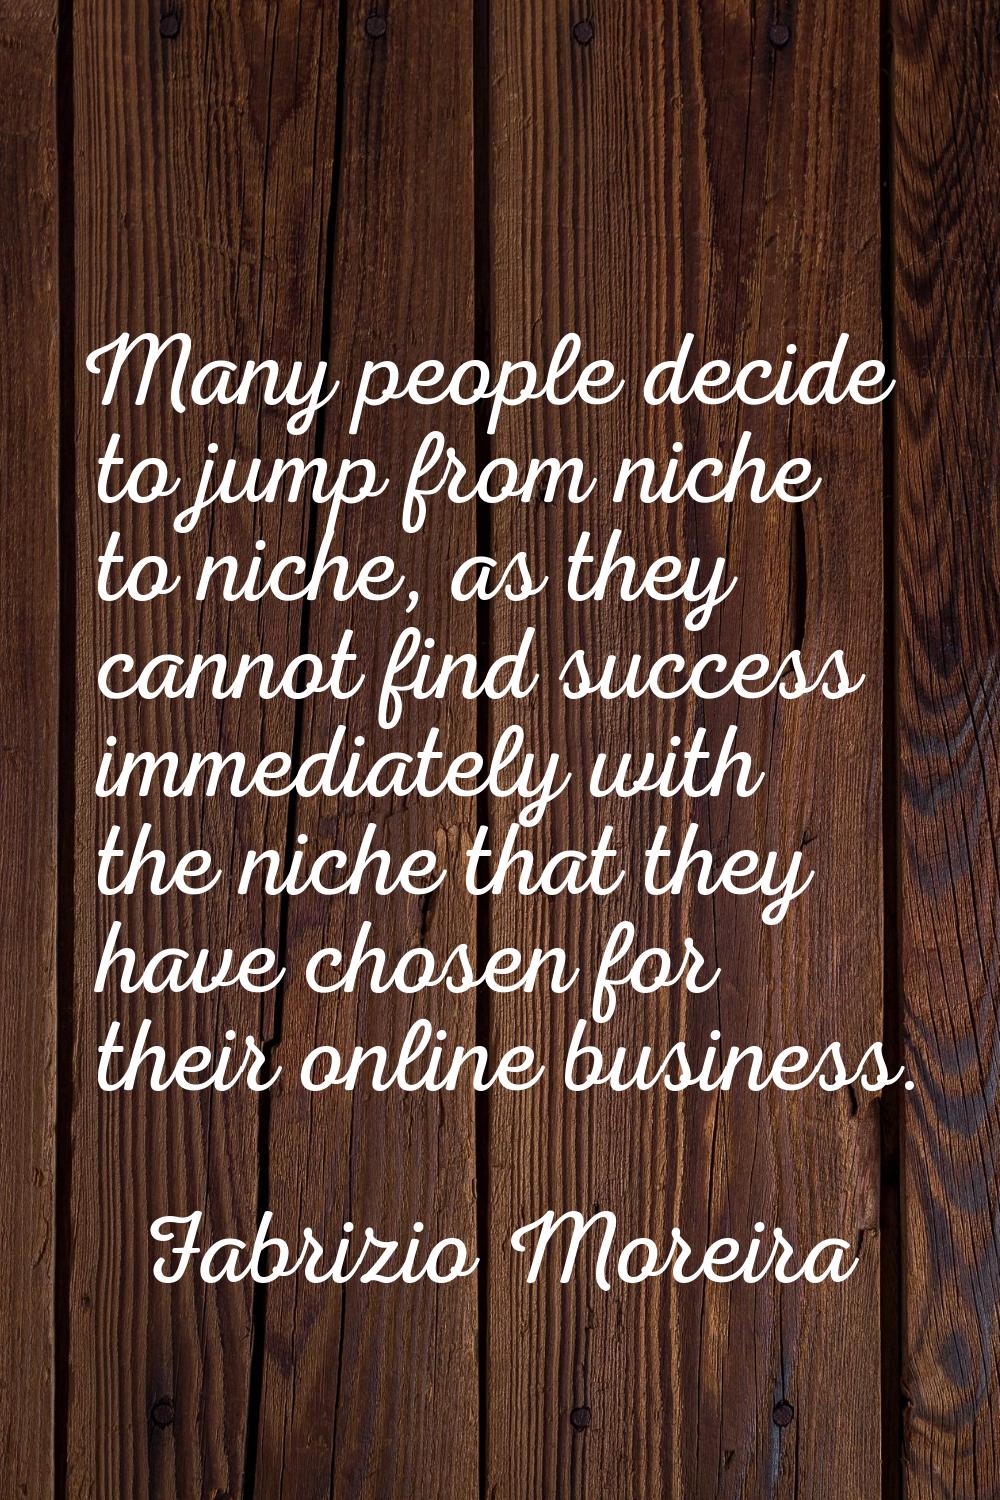 Many people decide to jump from niche to niche, as they cannot find success immediately with the ni